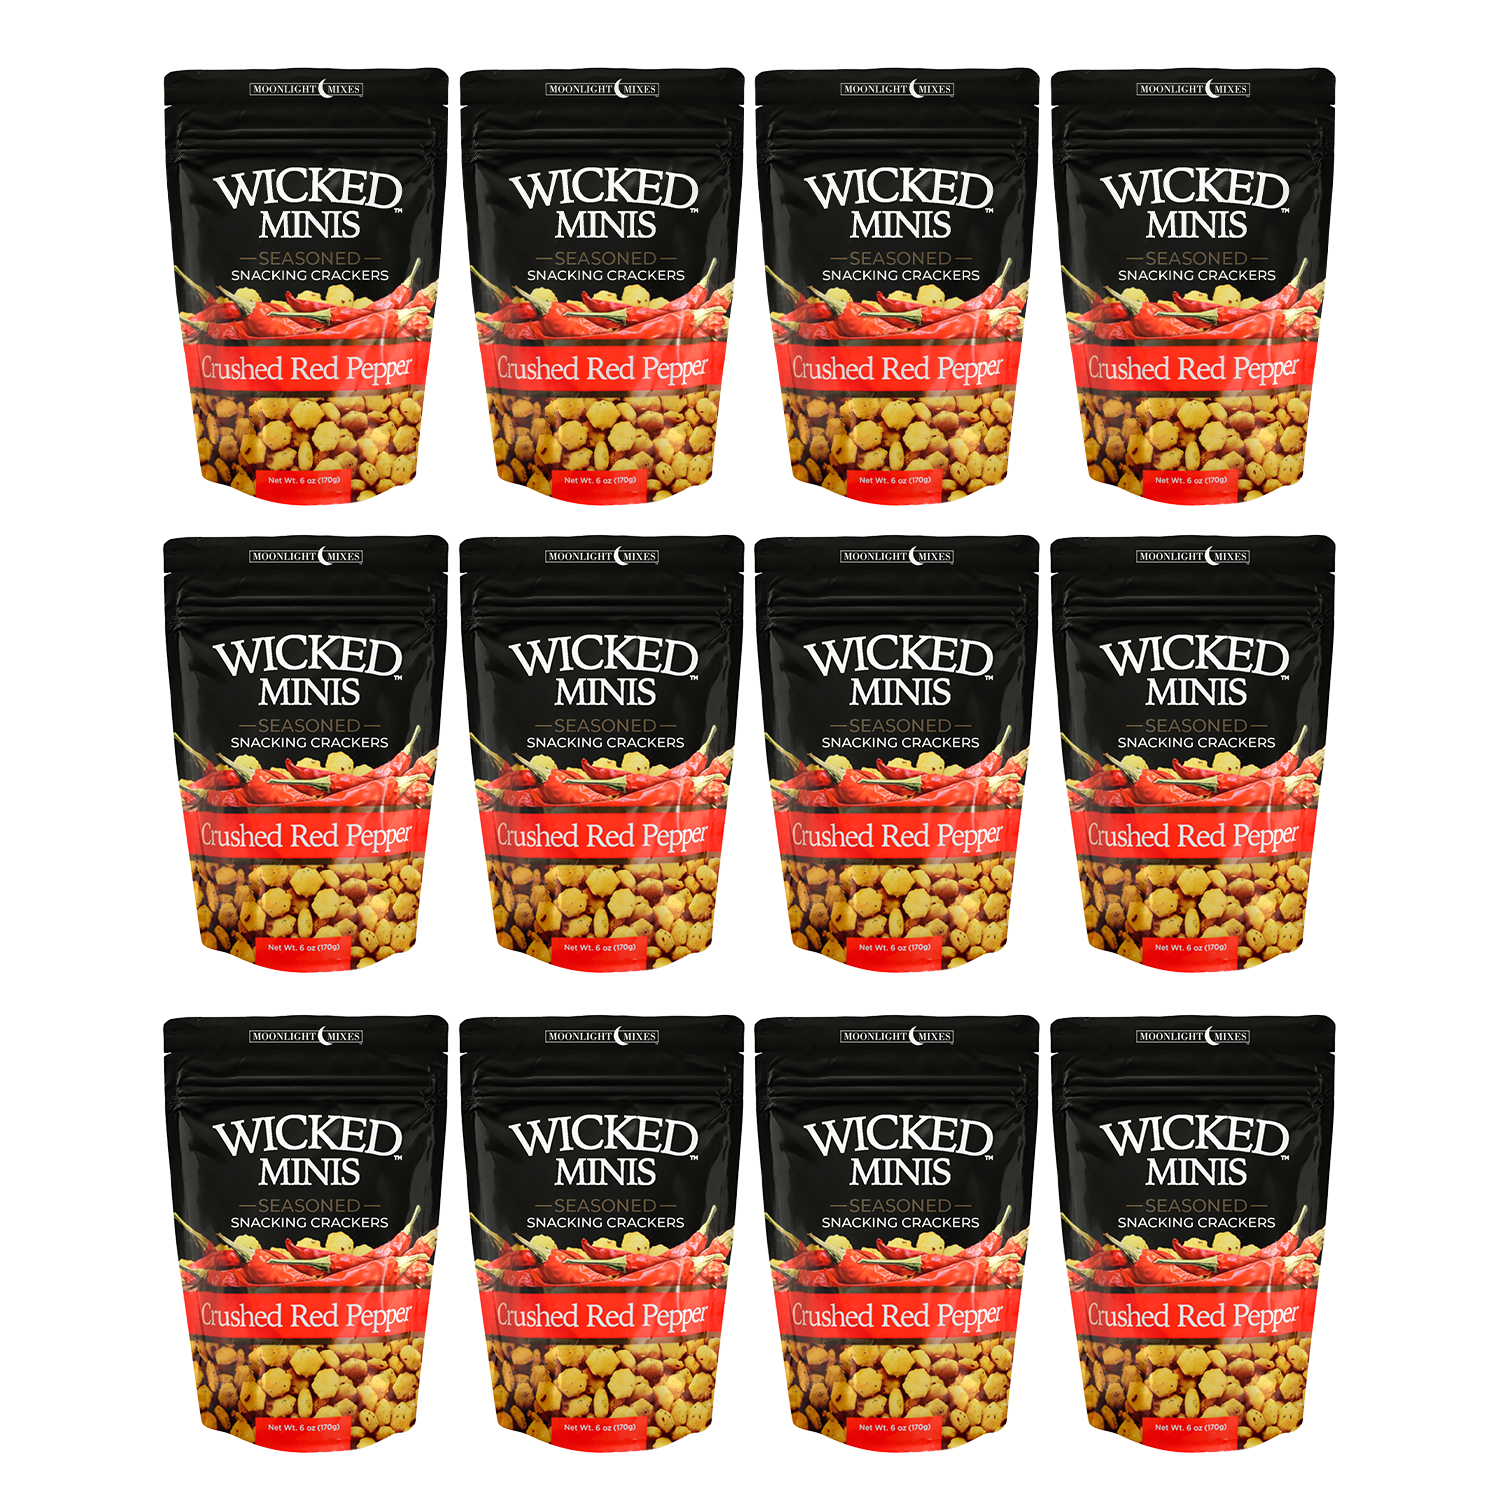 Wicked Minis Crushed Red Pepper Minis